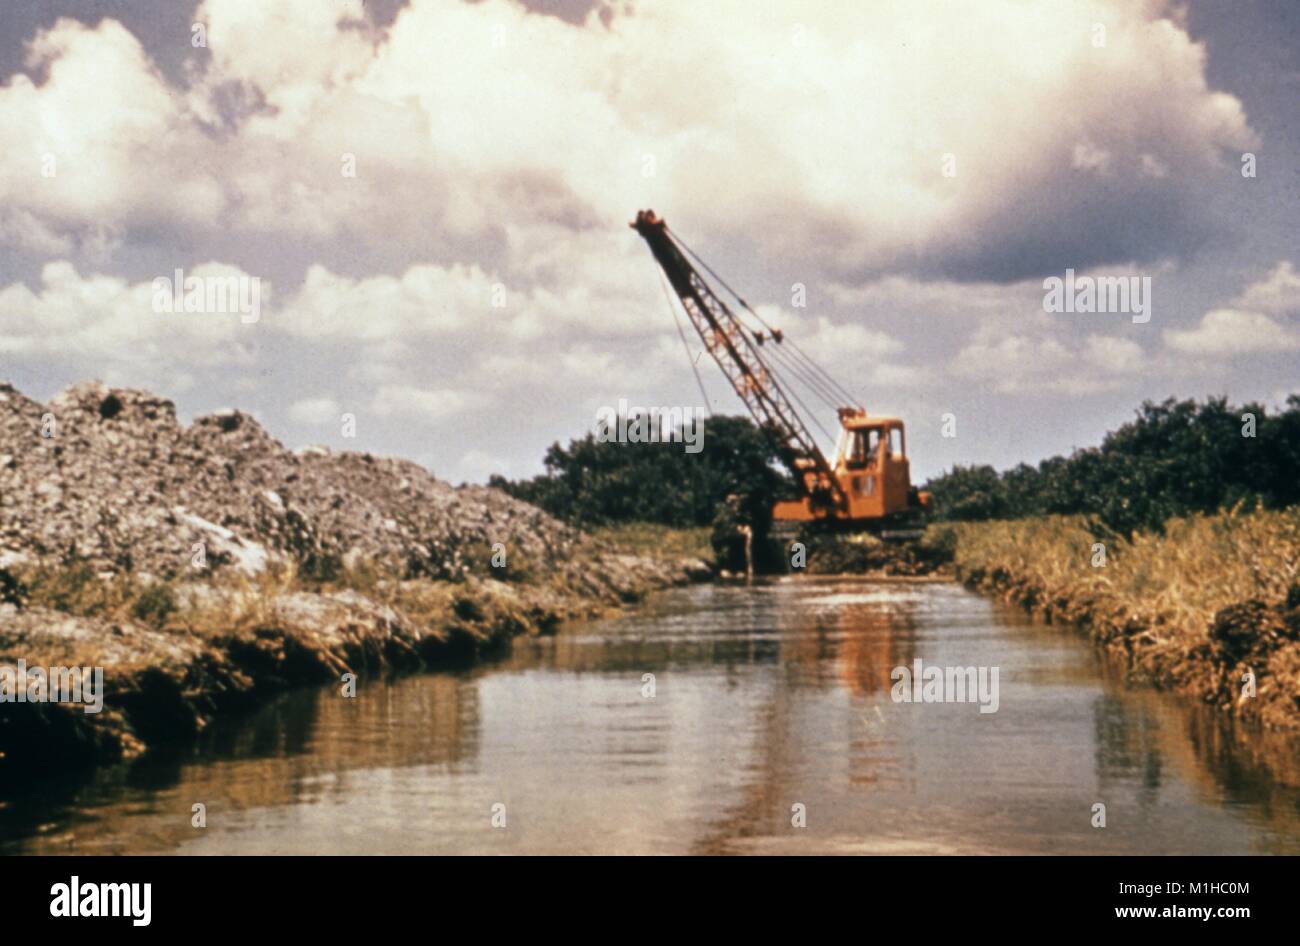 A dragline excavator clearing debris from a drainage canal to prevent the influx of vector-borne diseases and flood damage, 1976. Image courtesy CDC. () Stock Photo